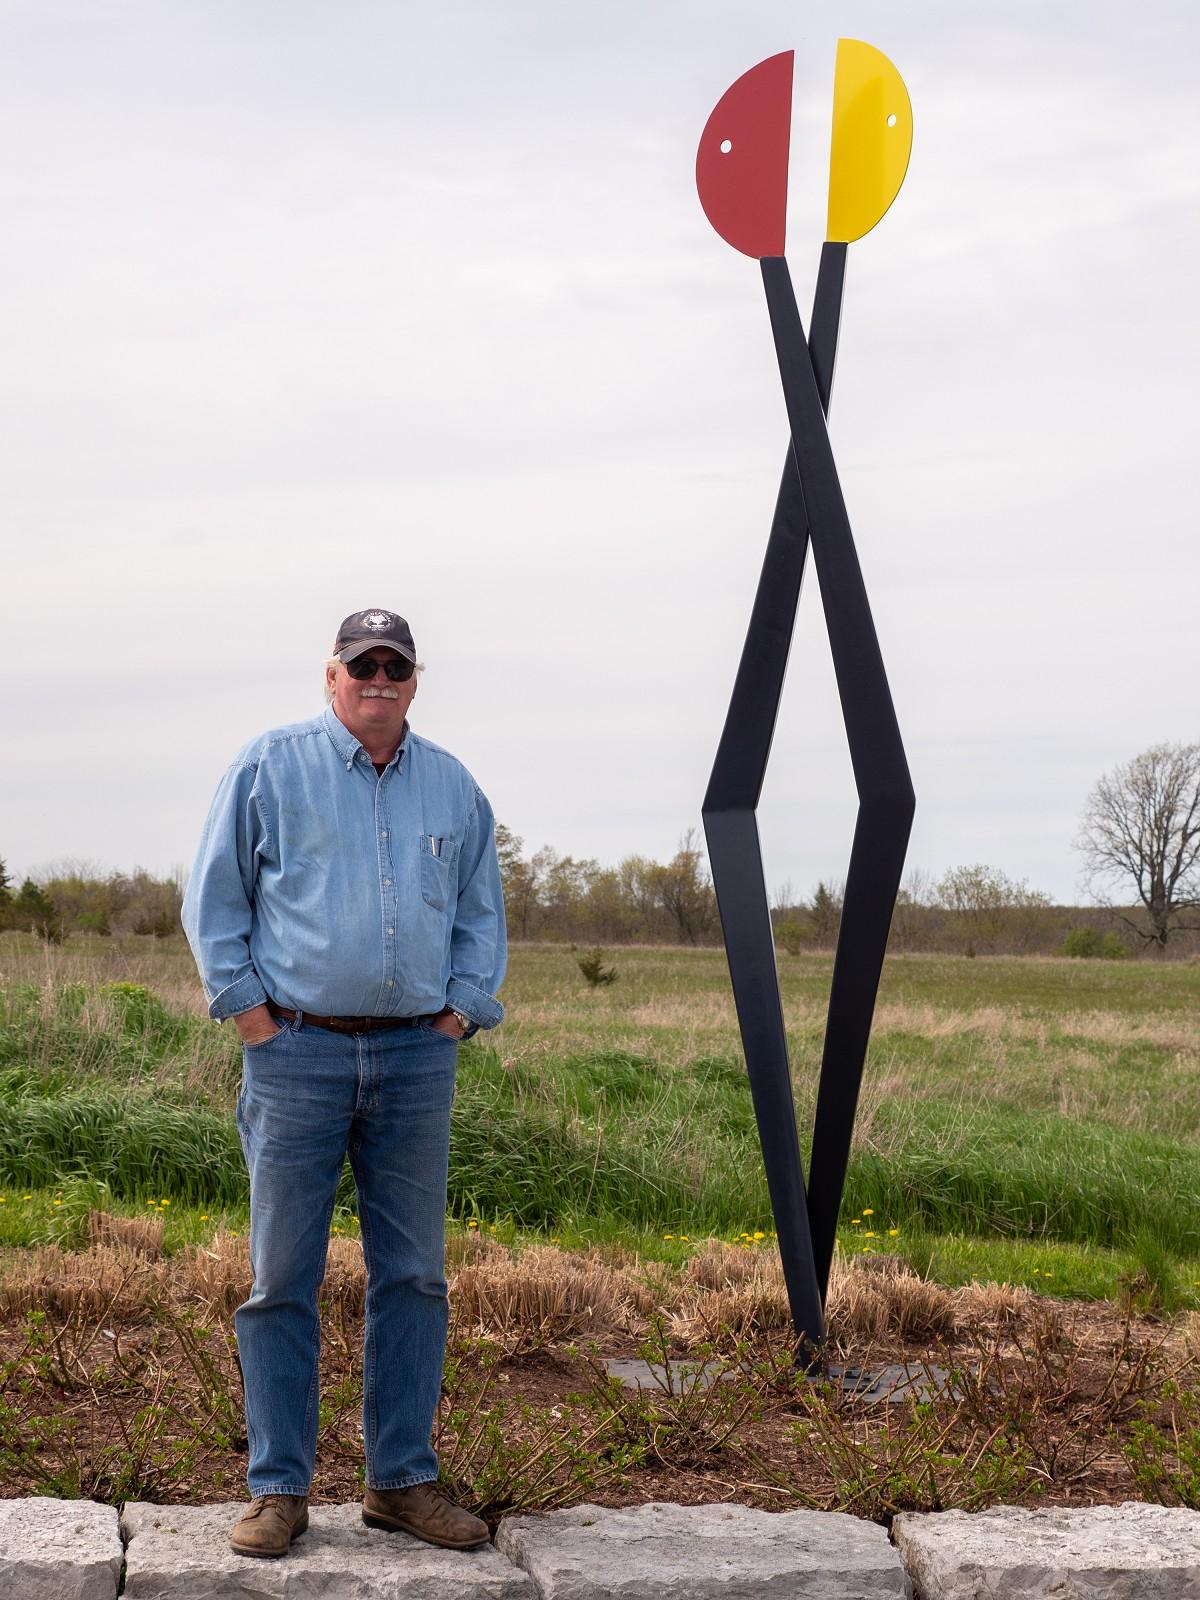 Bold, clean lines and vivid colours attract the viewer’s eye to this minimalist sculpture by Robert Clarke Ellis. The Toronto artist creates expressive pieces forged out of steel. The stick-like figures in black have yellow and red ‘heads’ that